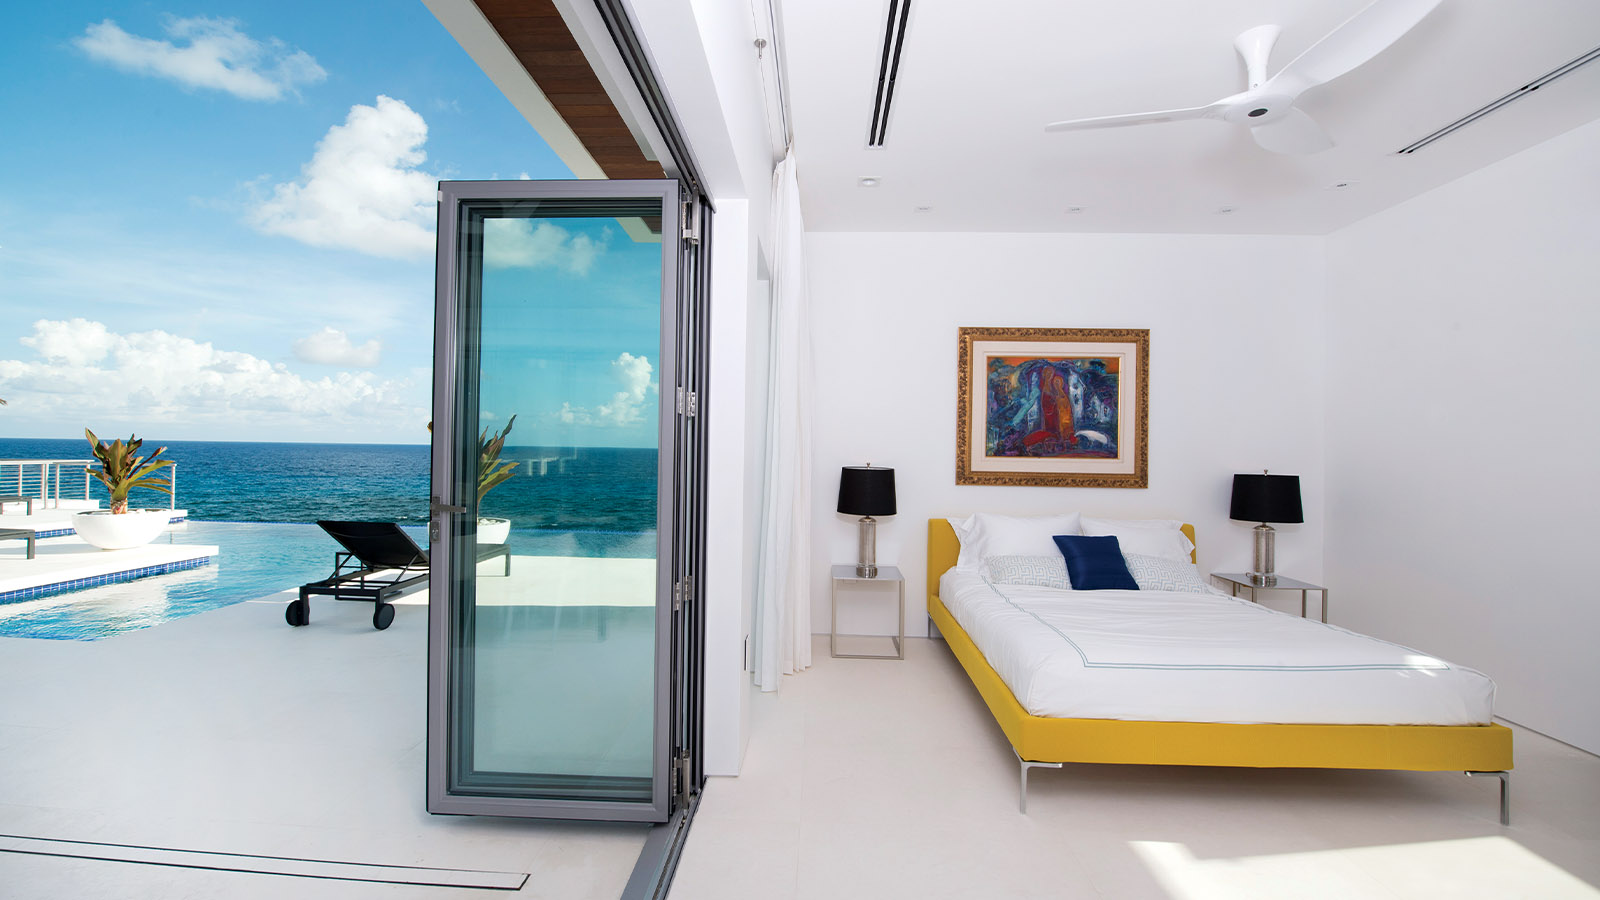 Photo of the Waterline House in the Cayman Islands